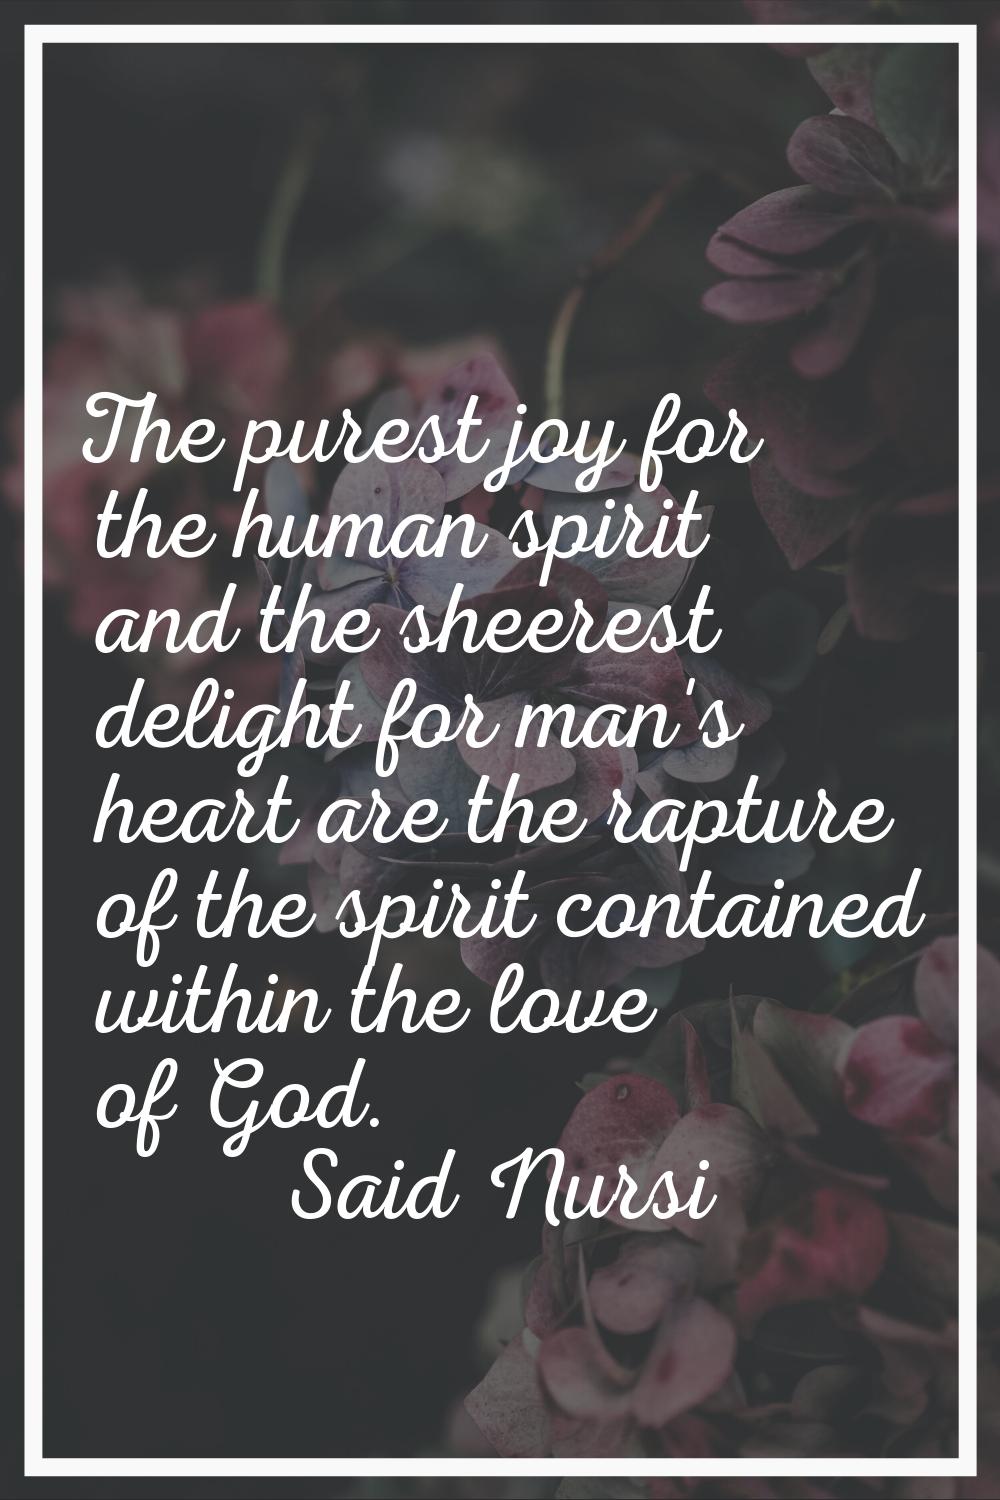 The purest joy for the human spirit and the sheerest delight for man's heart are the rapture of the